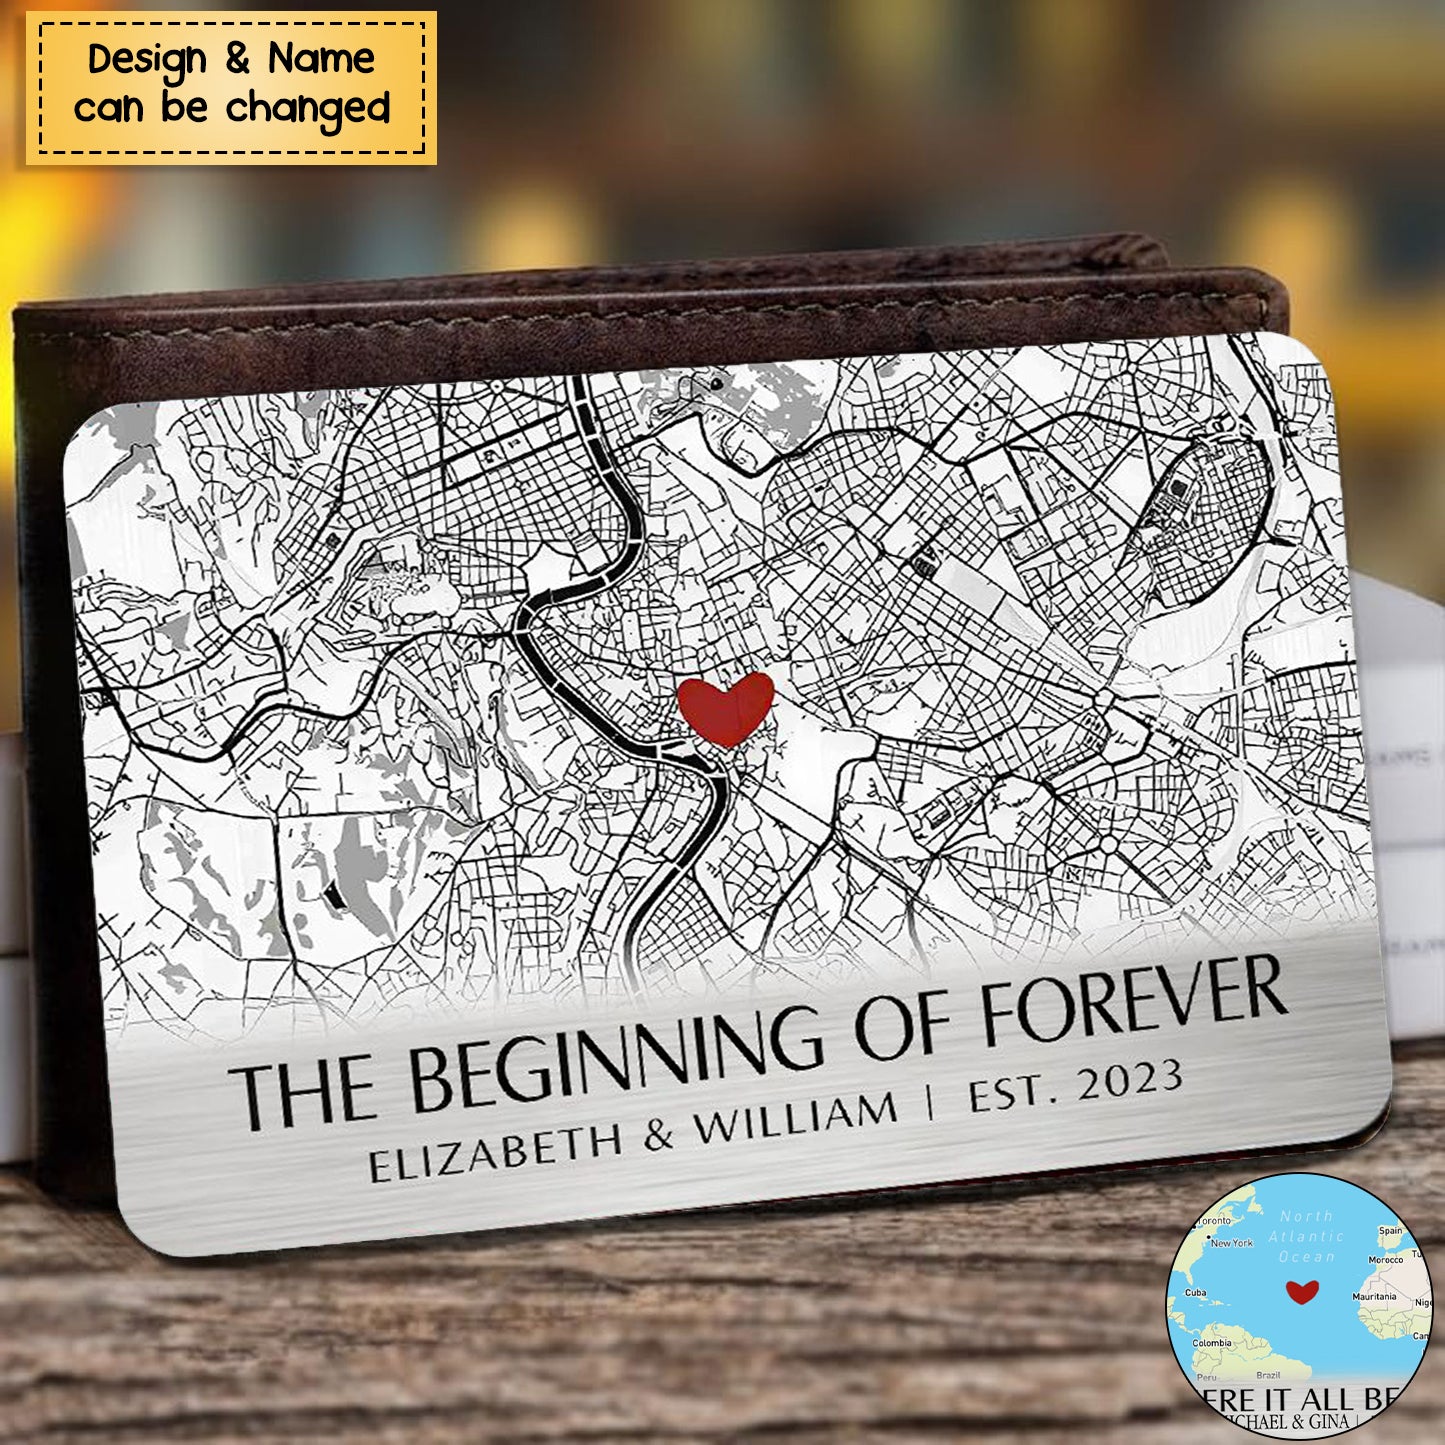 Where It All Began - Couple Personalized Custom Aluminum Wallet Card - Gift For Husband Wife, Anniversary